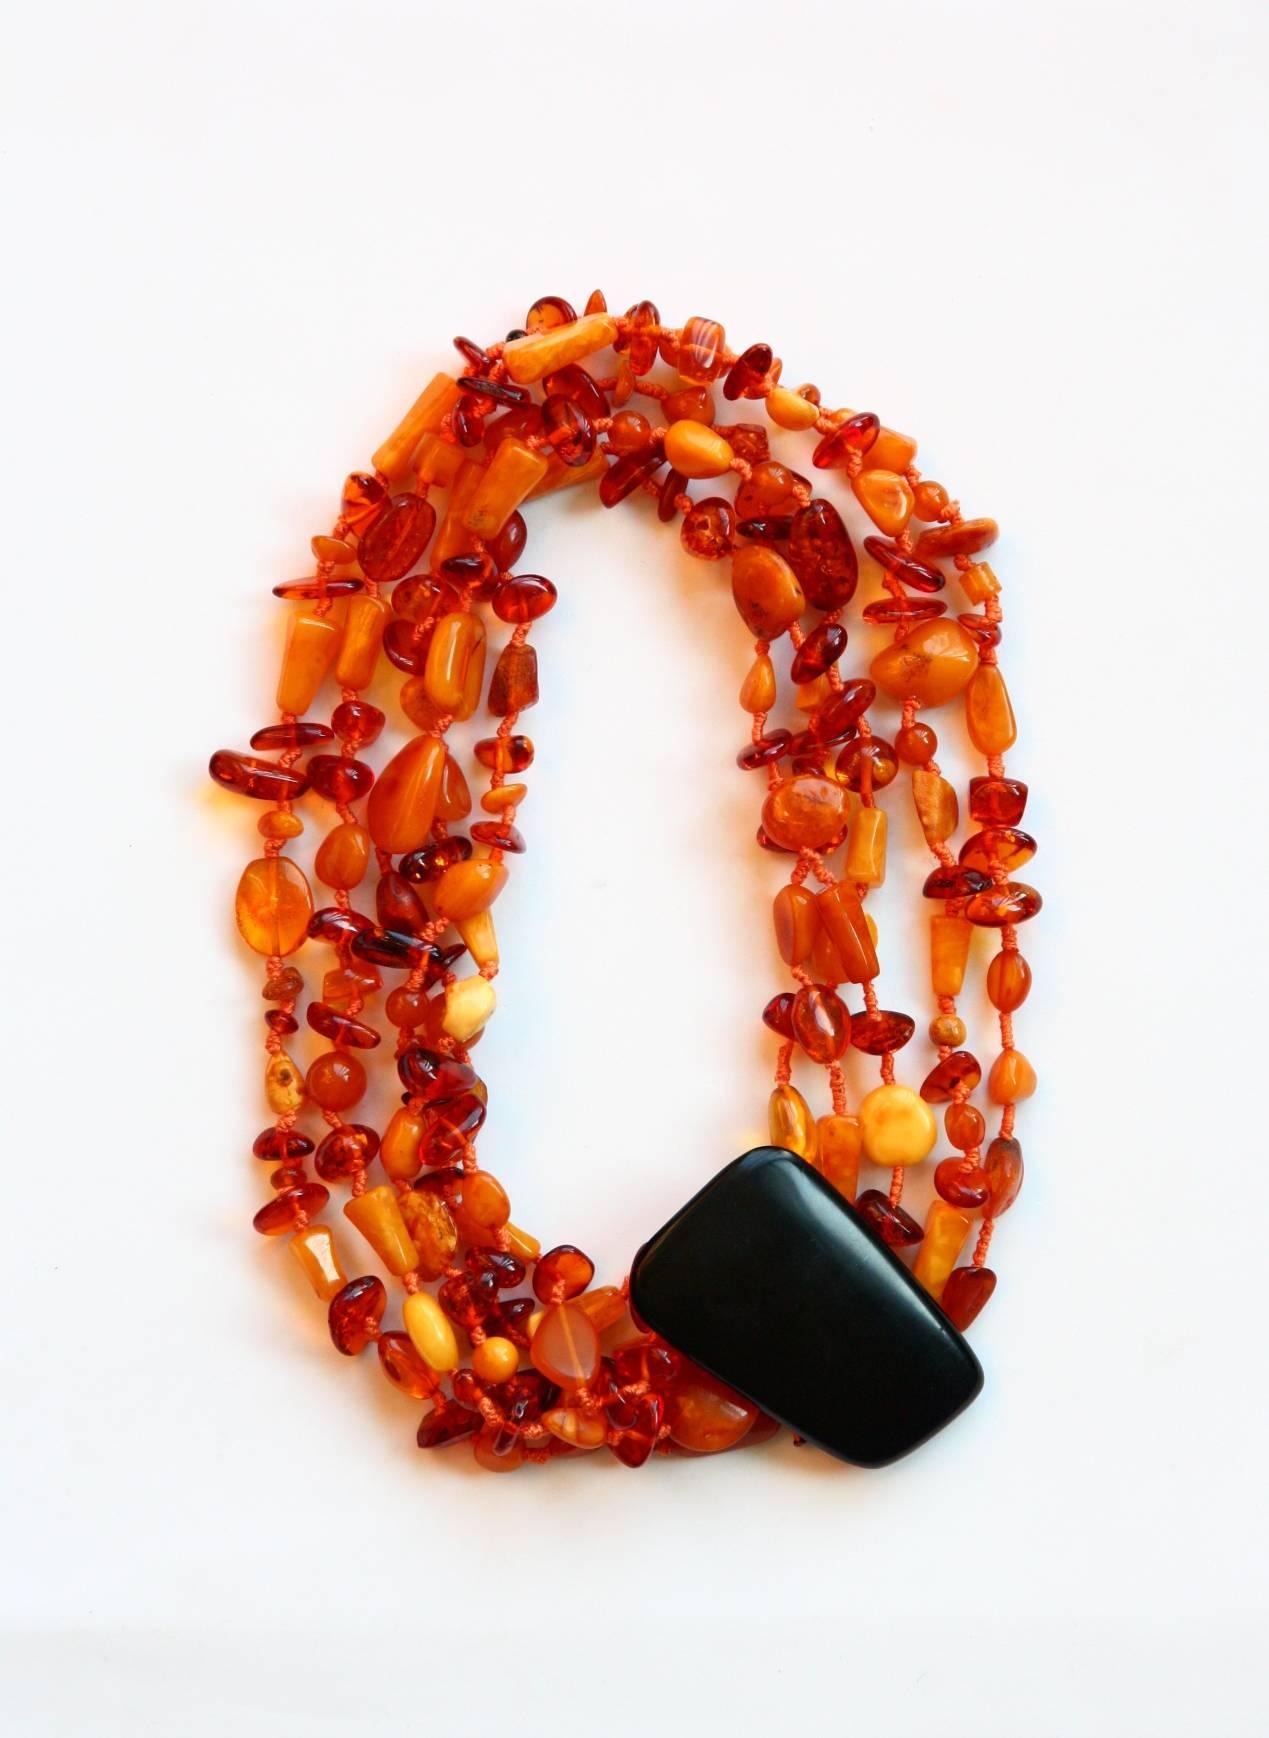 Veri nice amber different color with old lava black button total length 55cm.
All Giulia Colussi jewelry is new and has never been previously owned or worn. Each item will arrive at your door beautifully gift wrapped in our boxes, put inside an